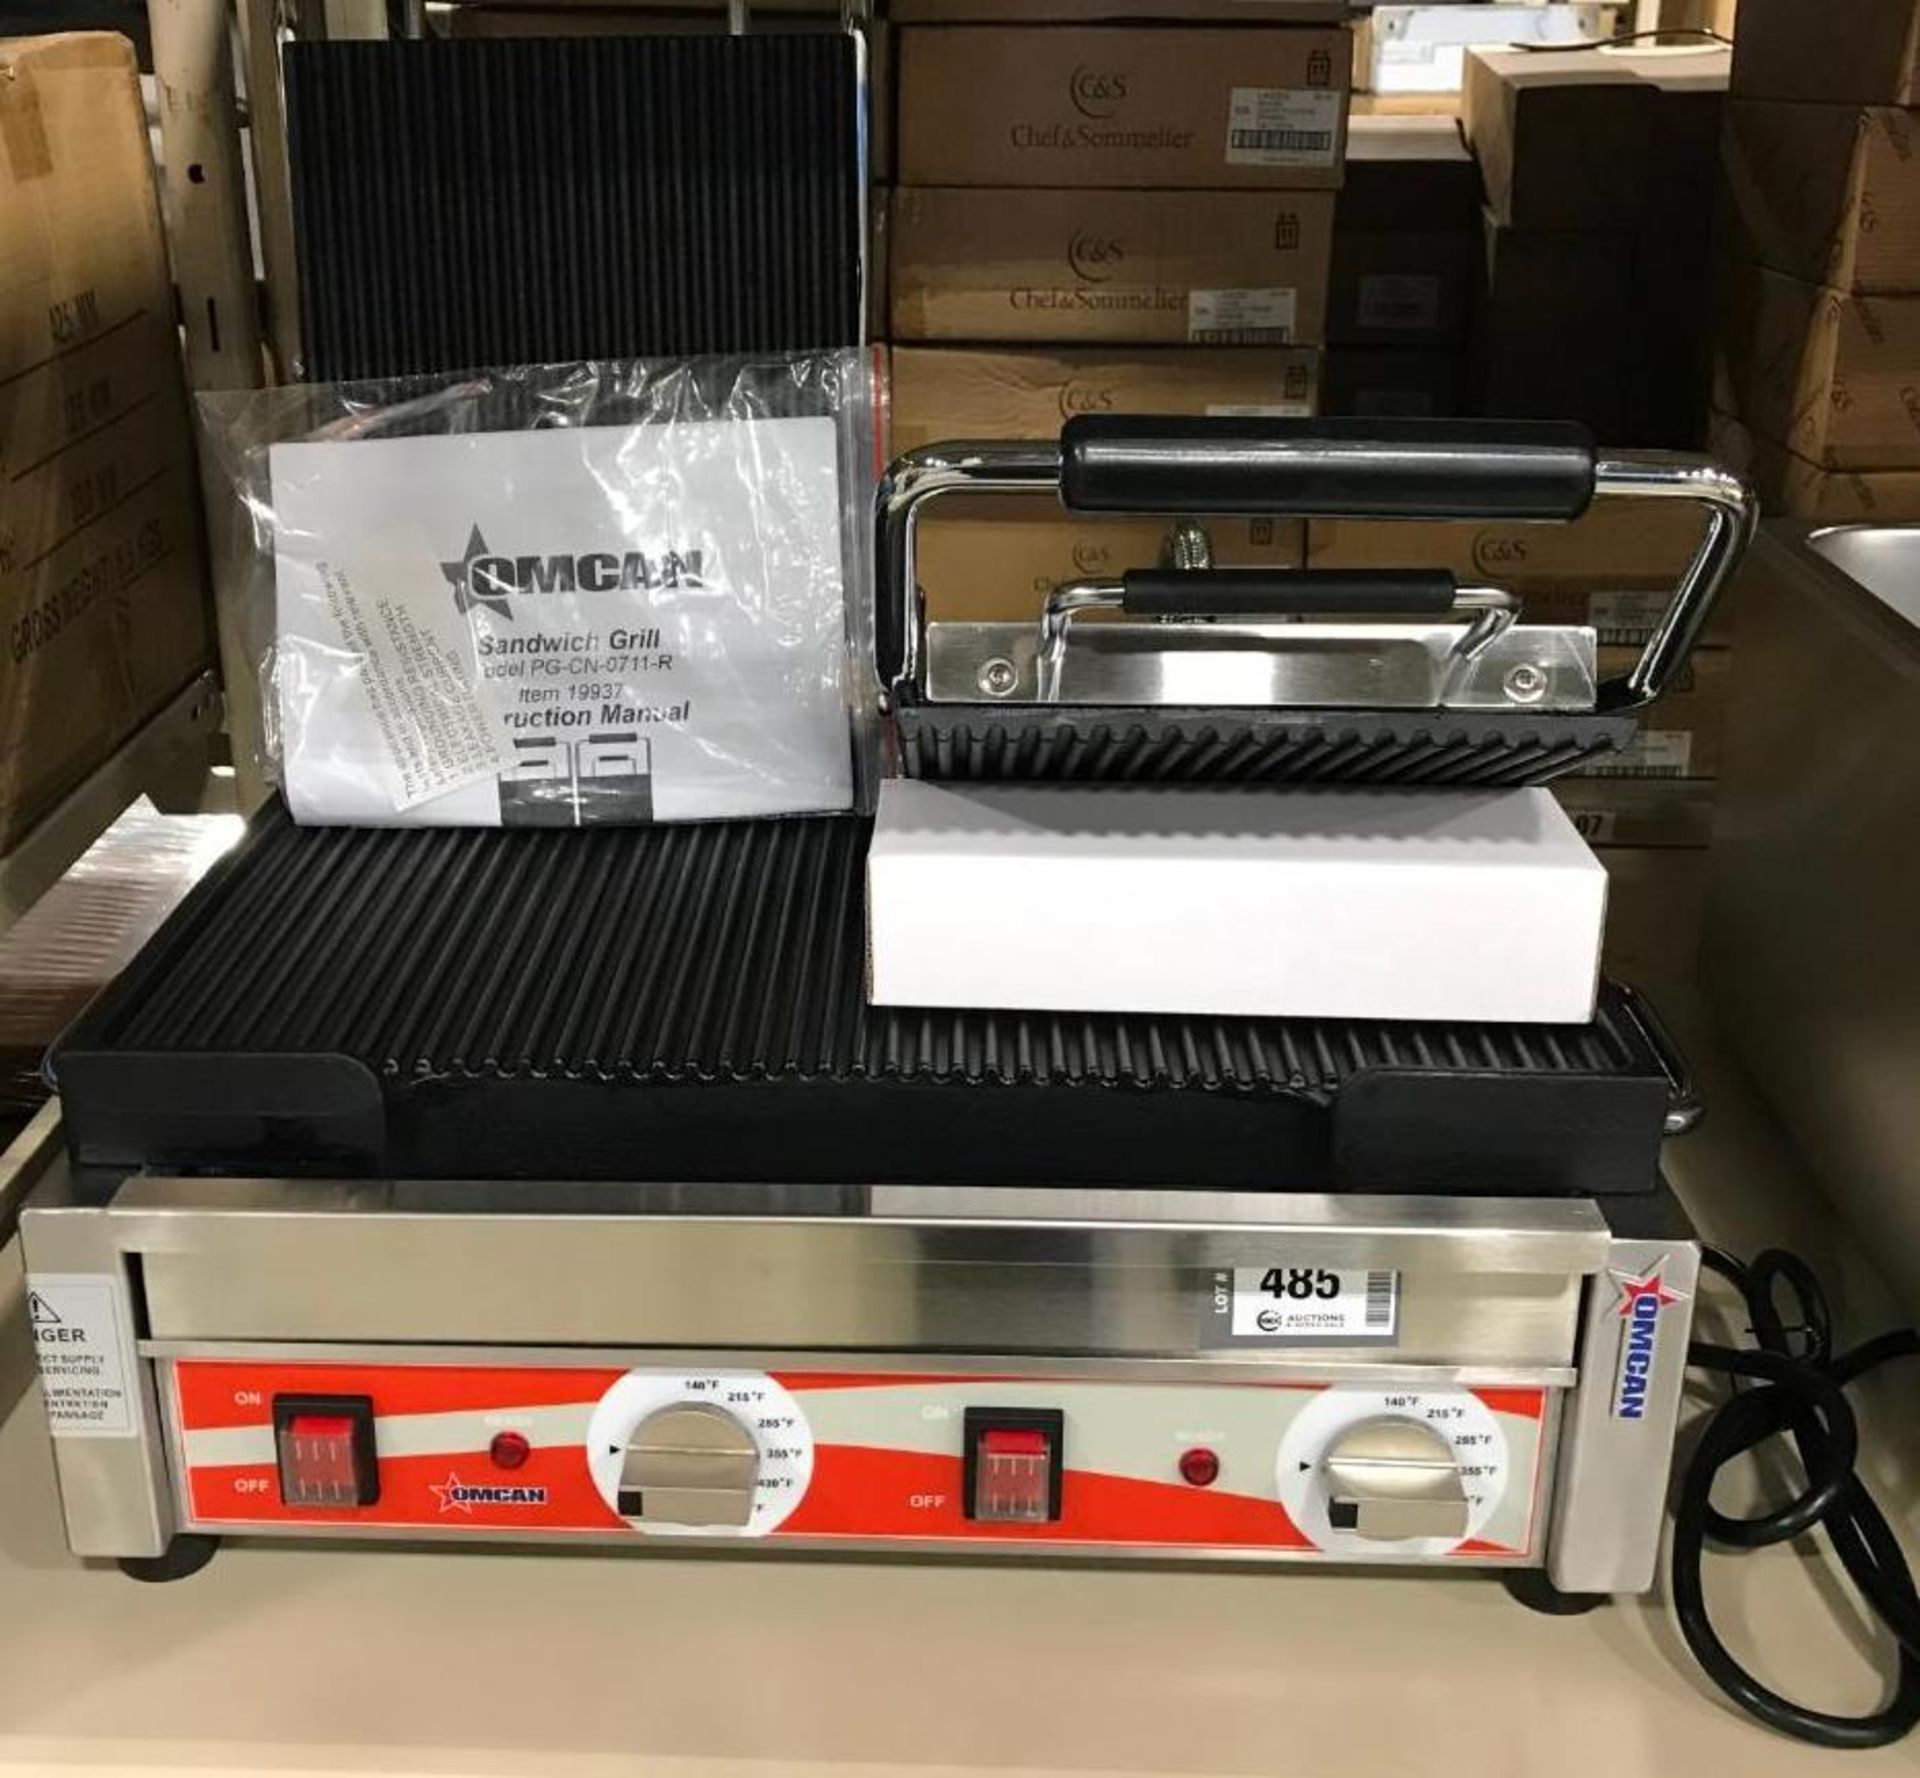 OMCAN DOUBLE PANINI RIBBED GRILL, 3200W, 220V, OMCAN 19937 - NEW - Image 2 of 3